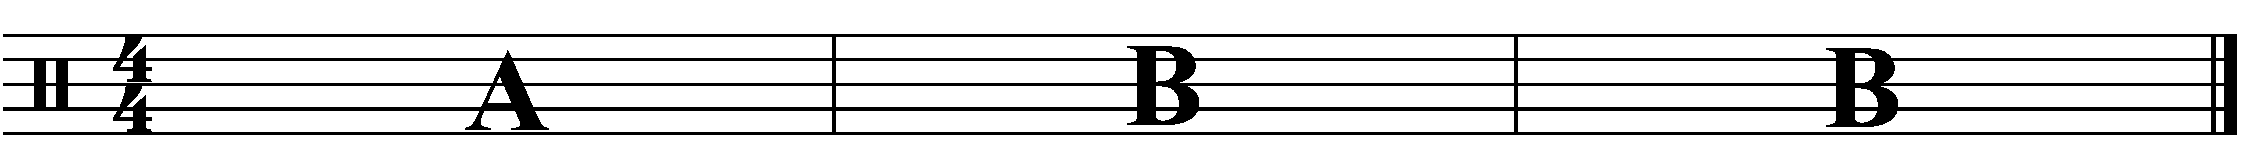 A three bar phrase made up of two different parts.